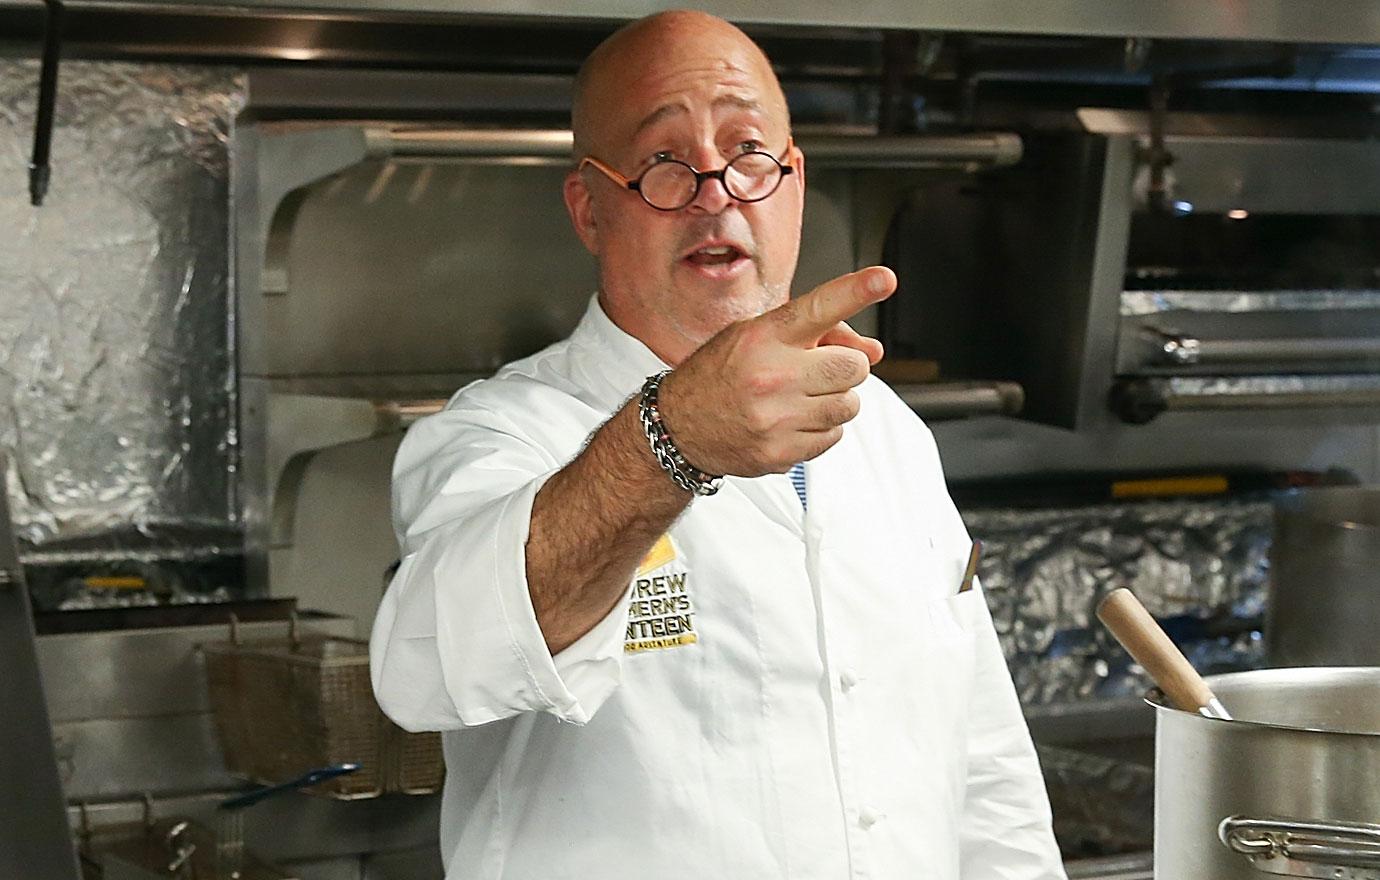 //travel channel’s andrew Zimmern disciplined over insensitivity